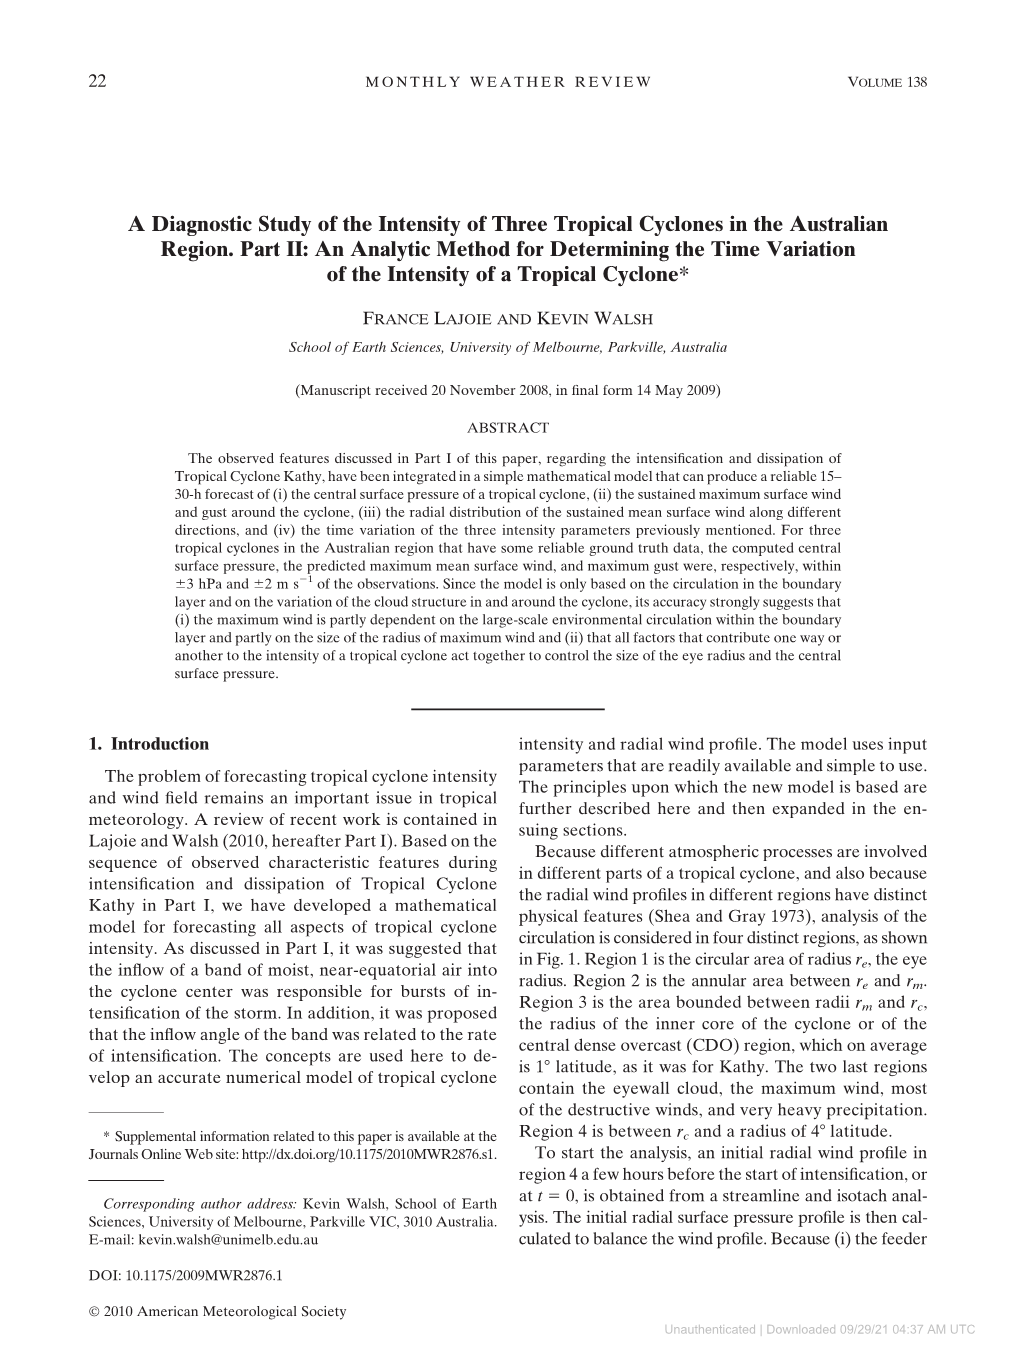 A Diagnostic Study of the Intensity of Three Tropical Cyclones in the Australian Region